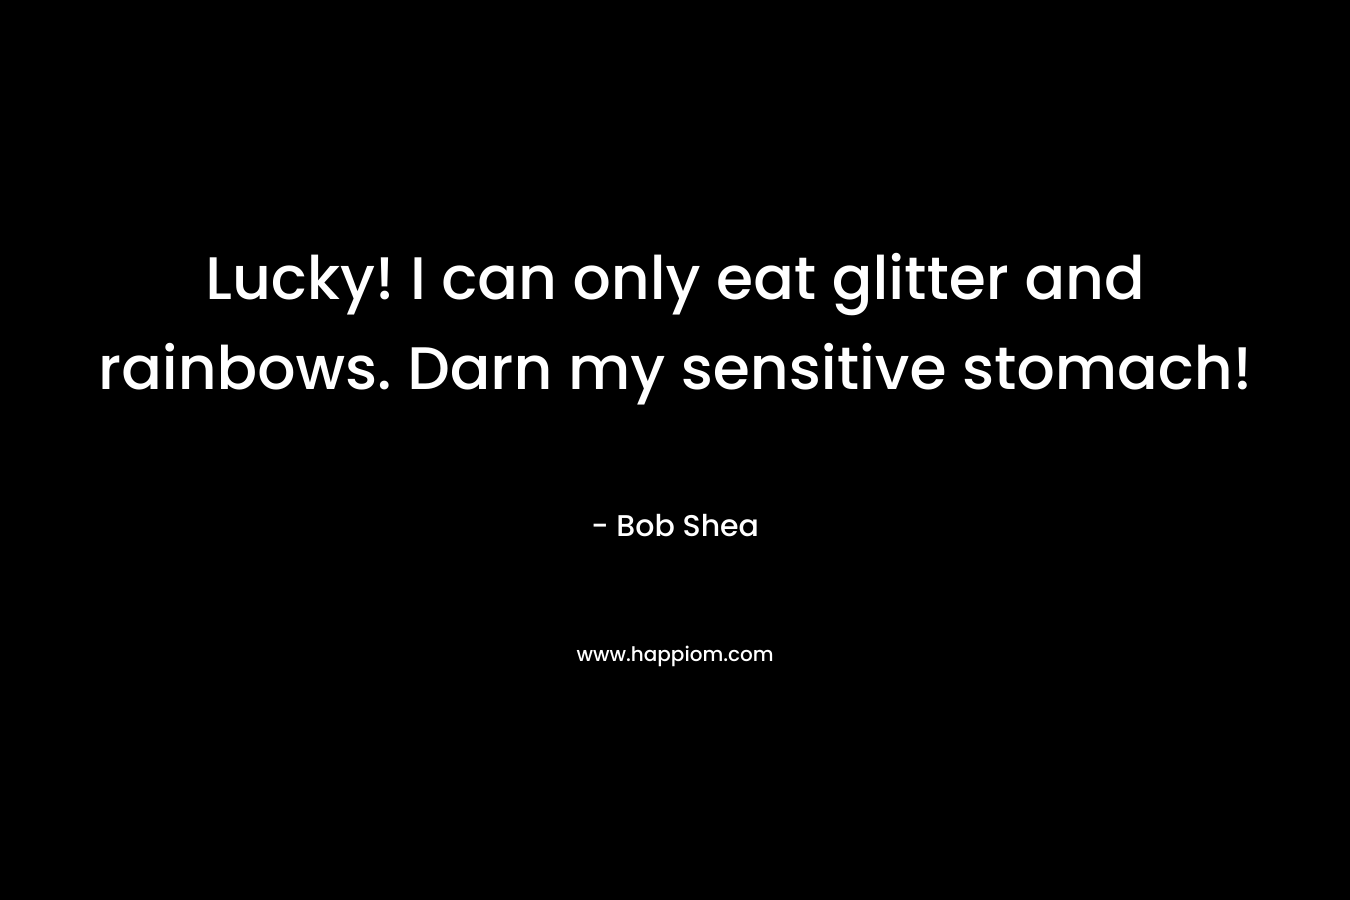 Lucky! I can only eat glitter and rainbows. Darn my sensitive stomach!